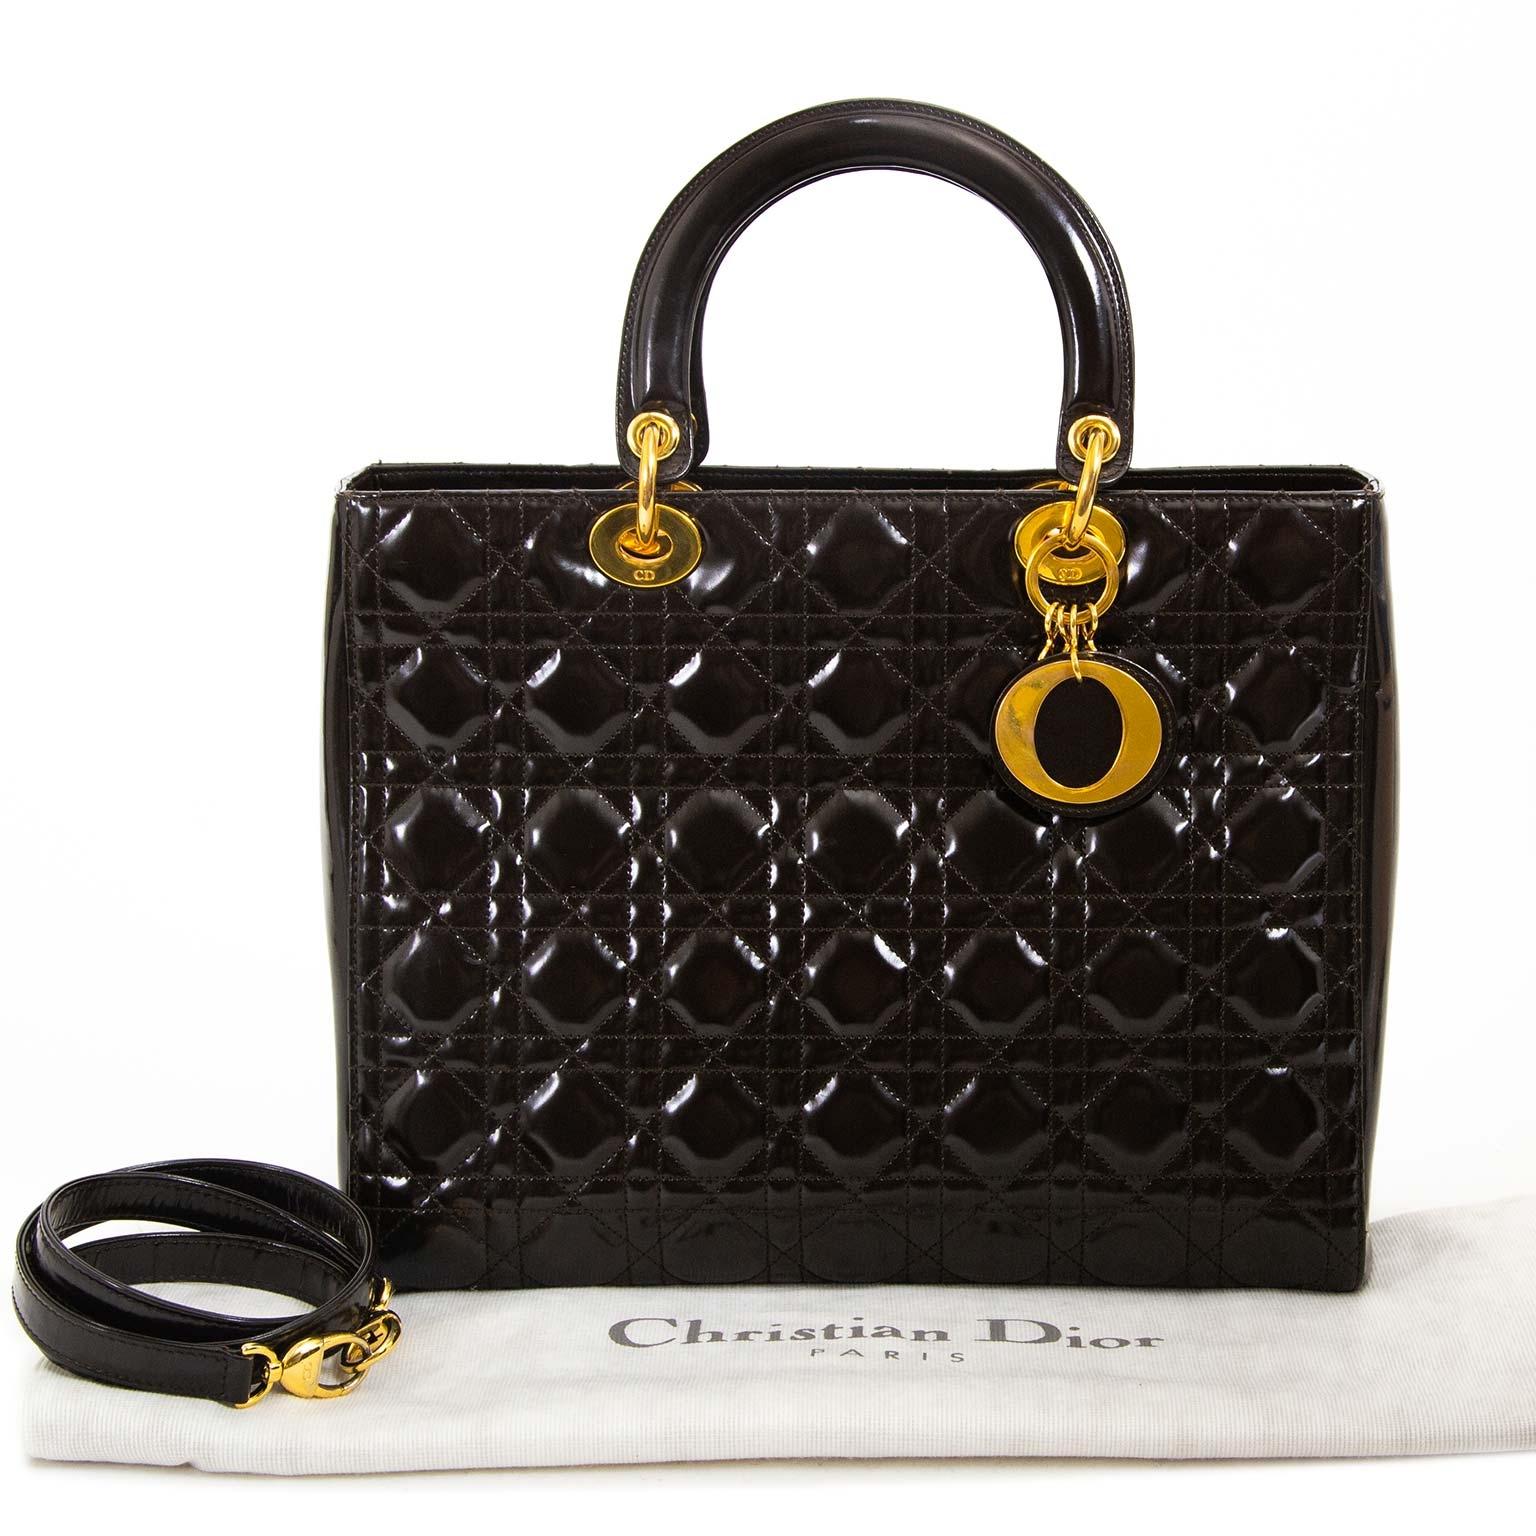 Very good condition 

Christian Dior Lady Dior Large Brown Handbag

The Lady Dior, a true classic with its clean lines and design elements. 
This beauty is crafted from patent brown leather finished with gold-tone hardware. 
You can wear this